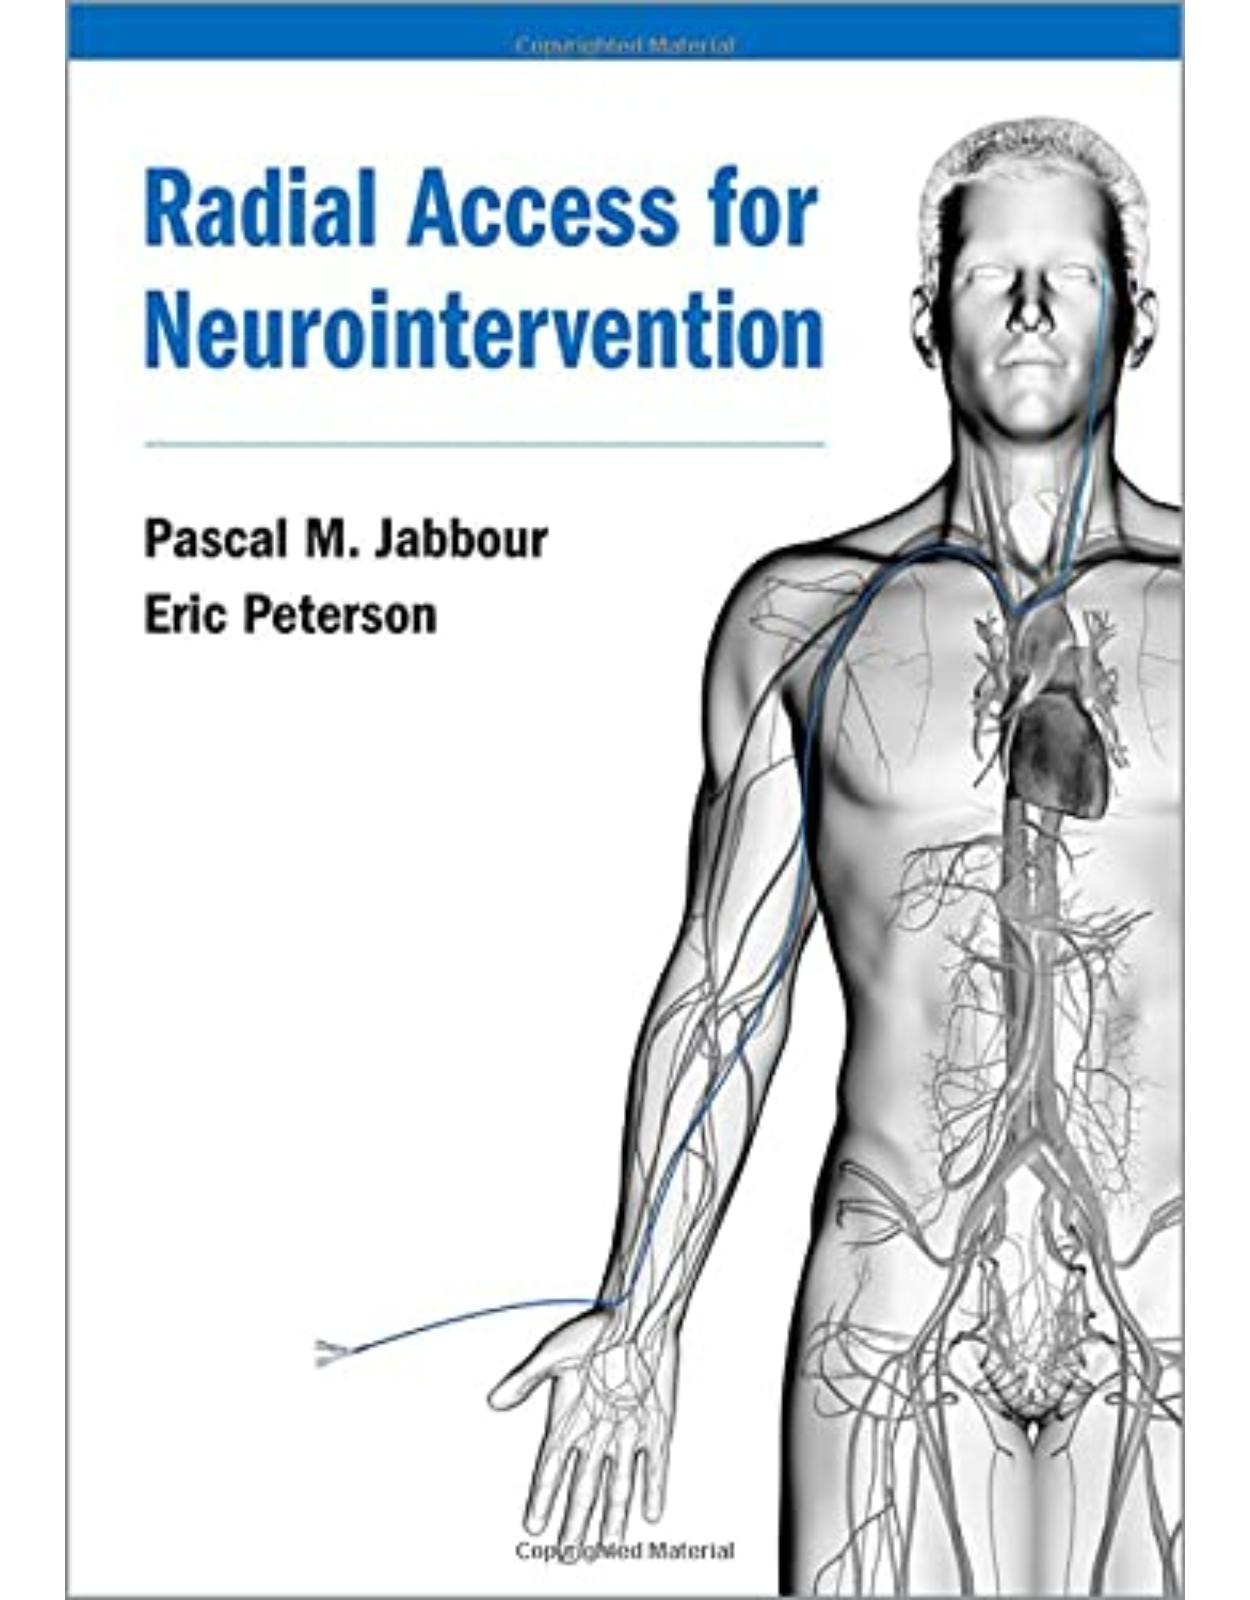 Radial Access for Neurointervention